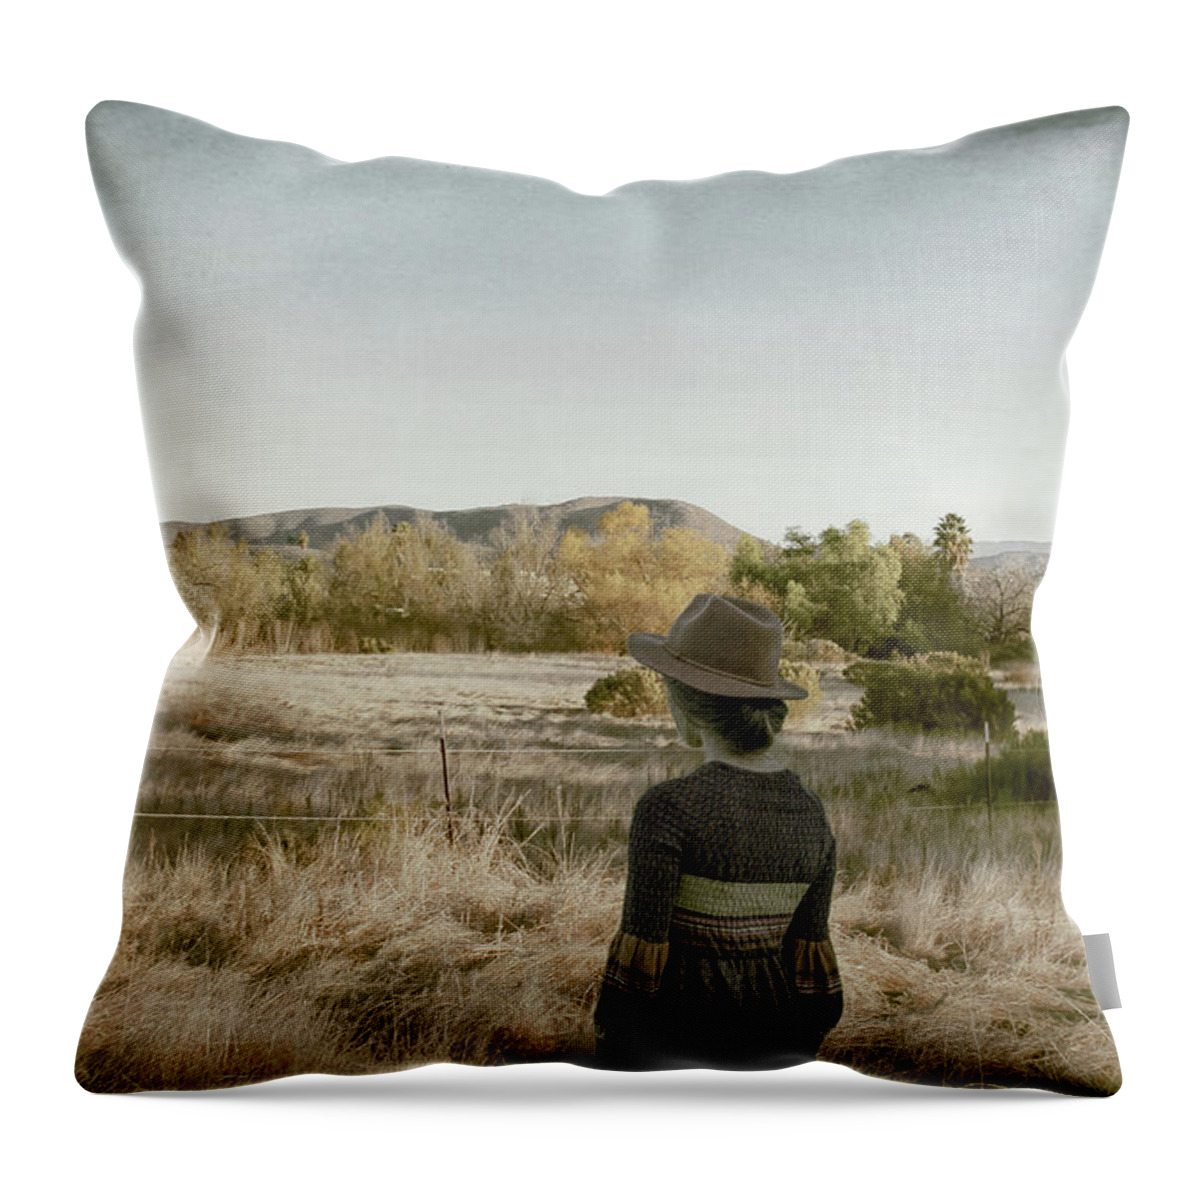 Sheep Throw Pillow featuring the photograph This Beautiful Life by Alison Frank